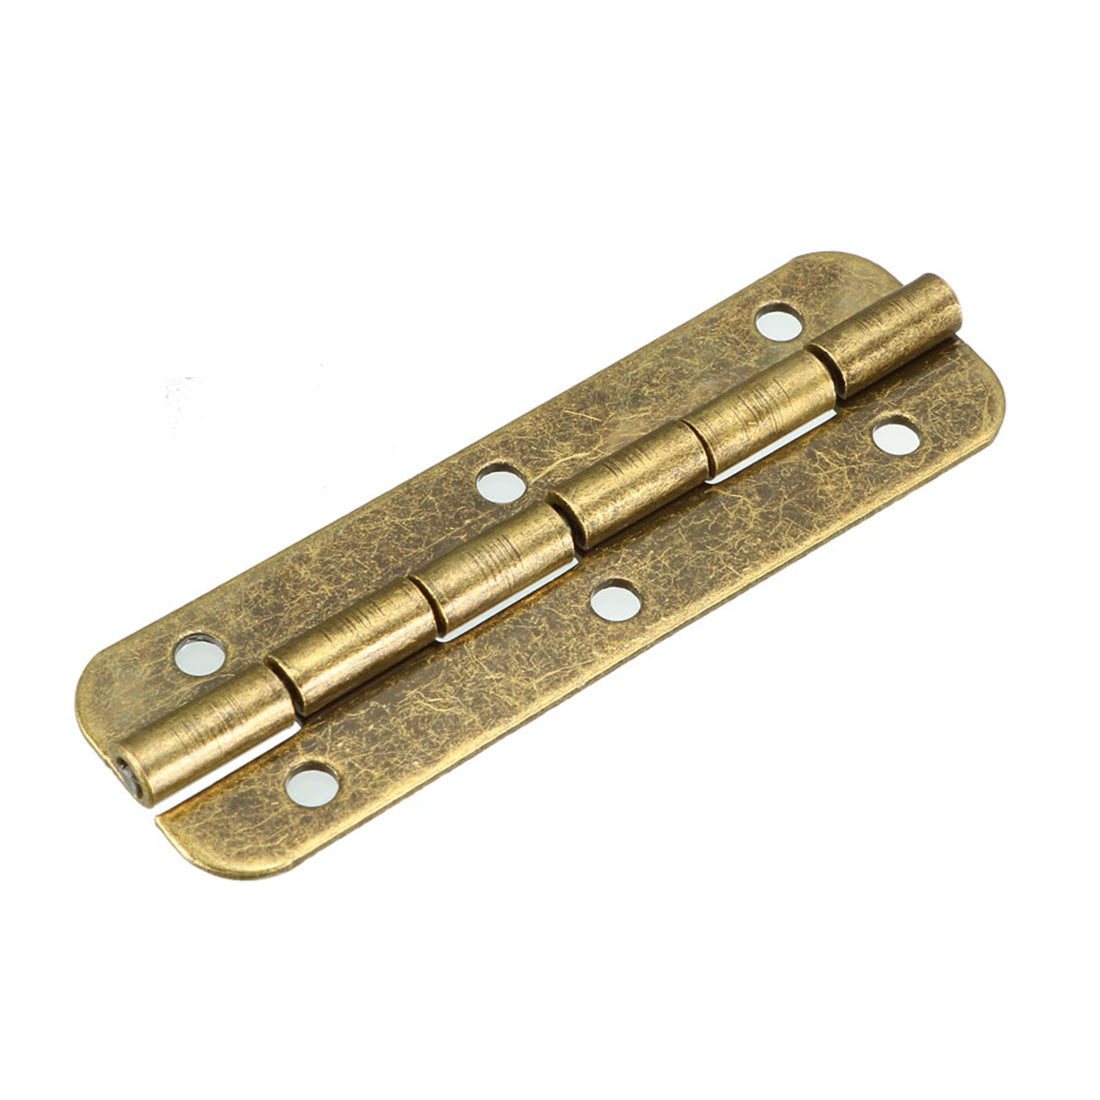 uxcell Uxcell 1.97" Antique Bronze Hinges Retro Hinge Replacement with Screws 10pcs